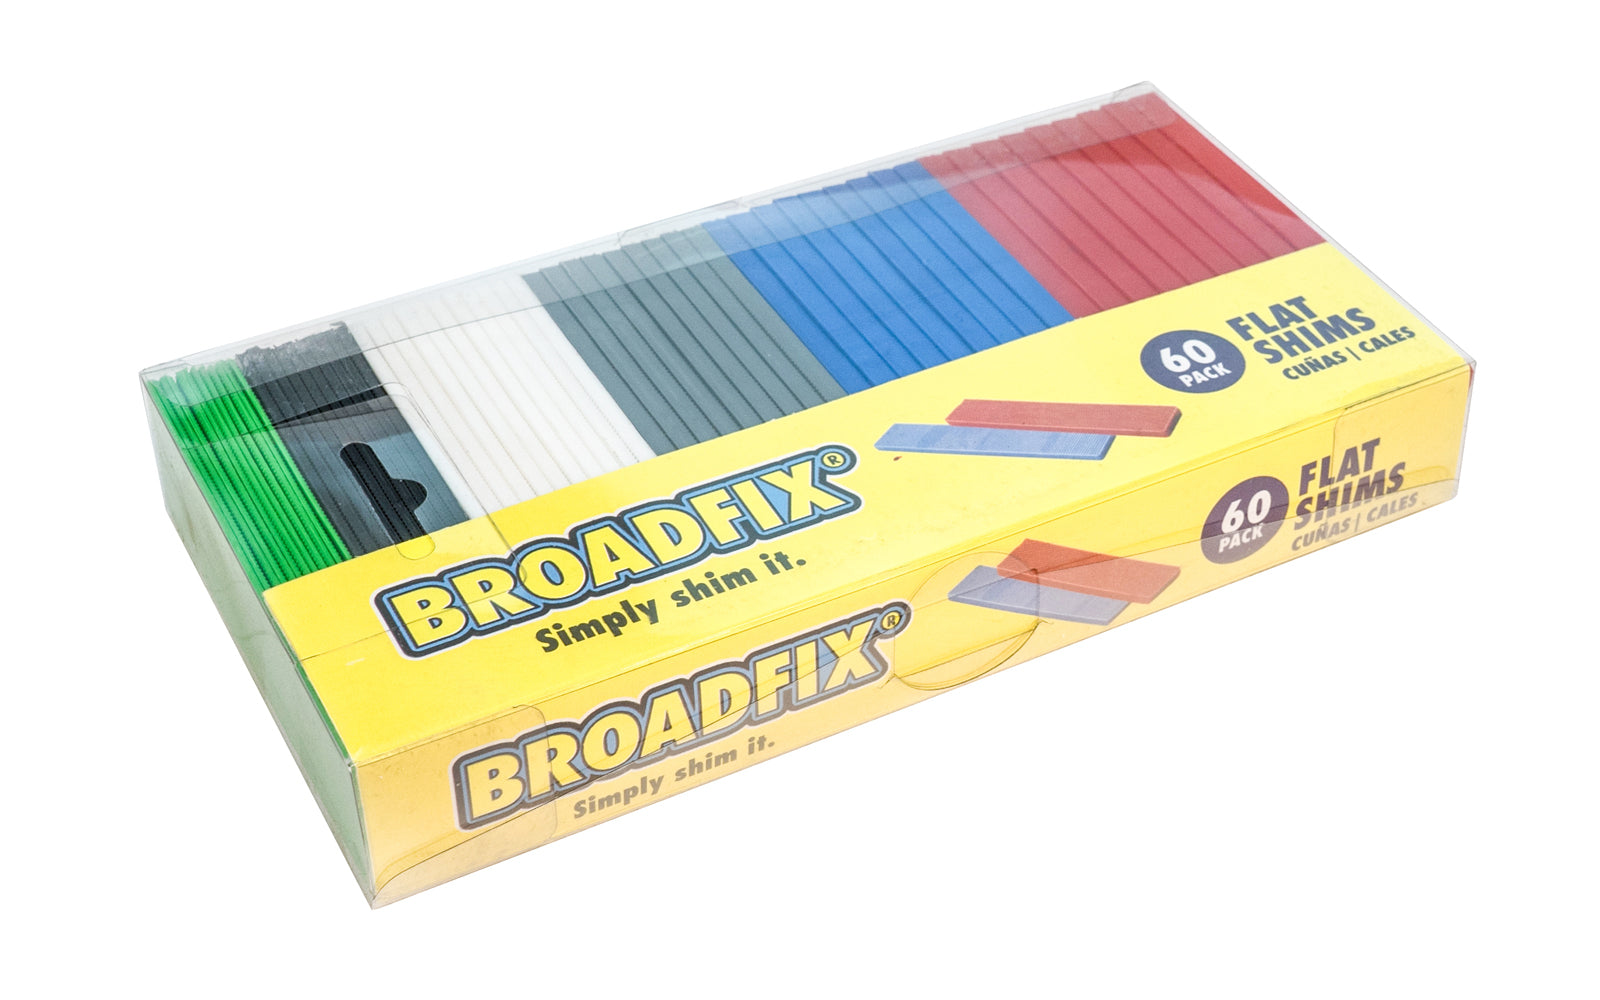 Flat 4" x 1-1/8" plastic shims by Broadfix are great for a variety of applications. Use for doors, windows, cabinets, countertops, leveling appliances, floors, craft projects etc. 62 pack bundle. Includes 10 each of the following sizes: 1/32" (1 mm), 1/16" (2 mm), 1/8" (3 mm), 5/32" (4 mm), 3/16" (5 mm), 1/4" (6 mm)